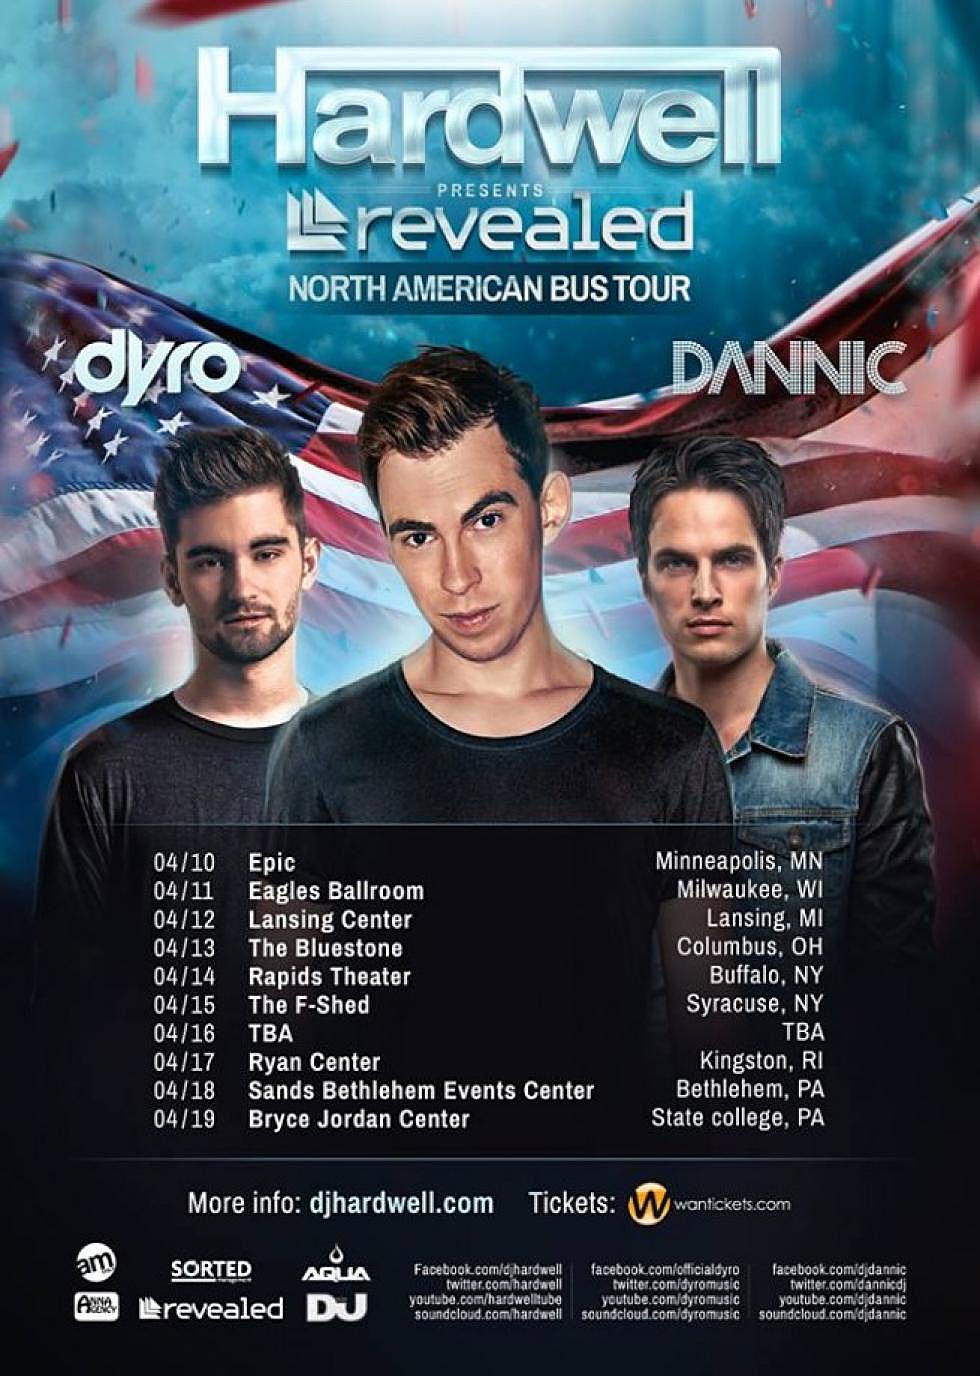 Giveaway: Win VIP Tickets And A Meet And Greet With Hardwell On His North American Bus Tour